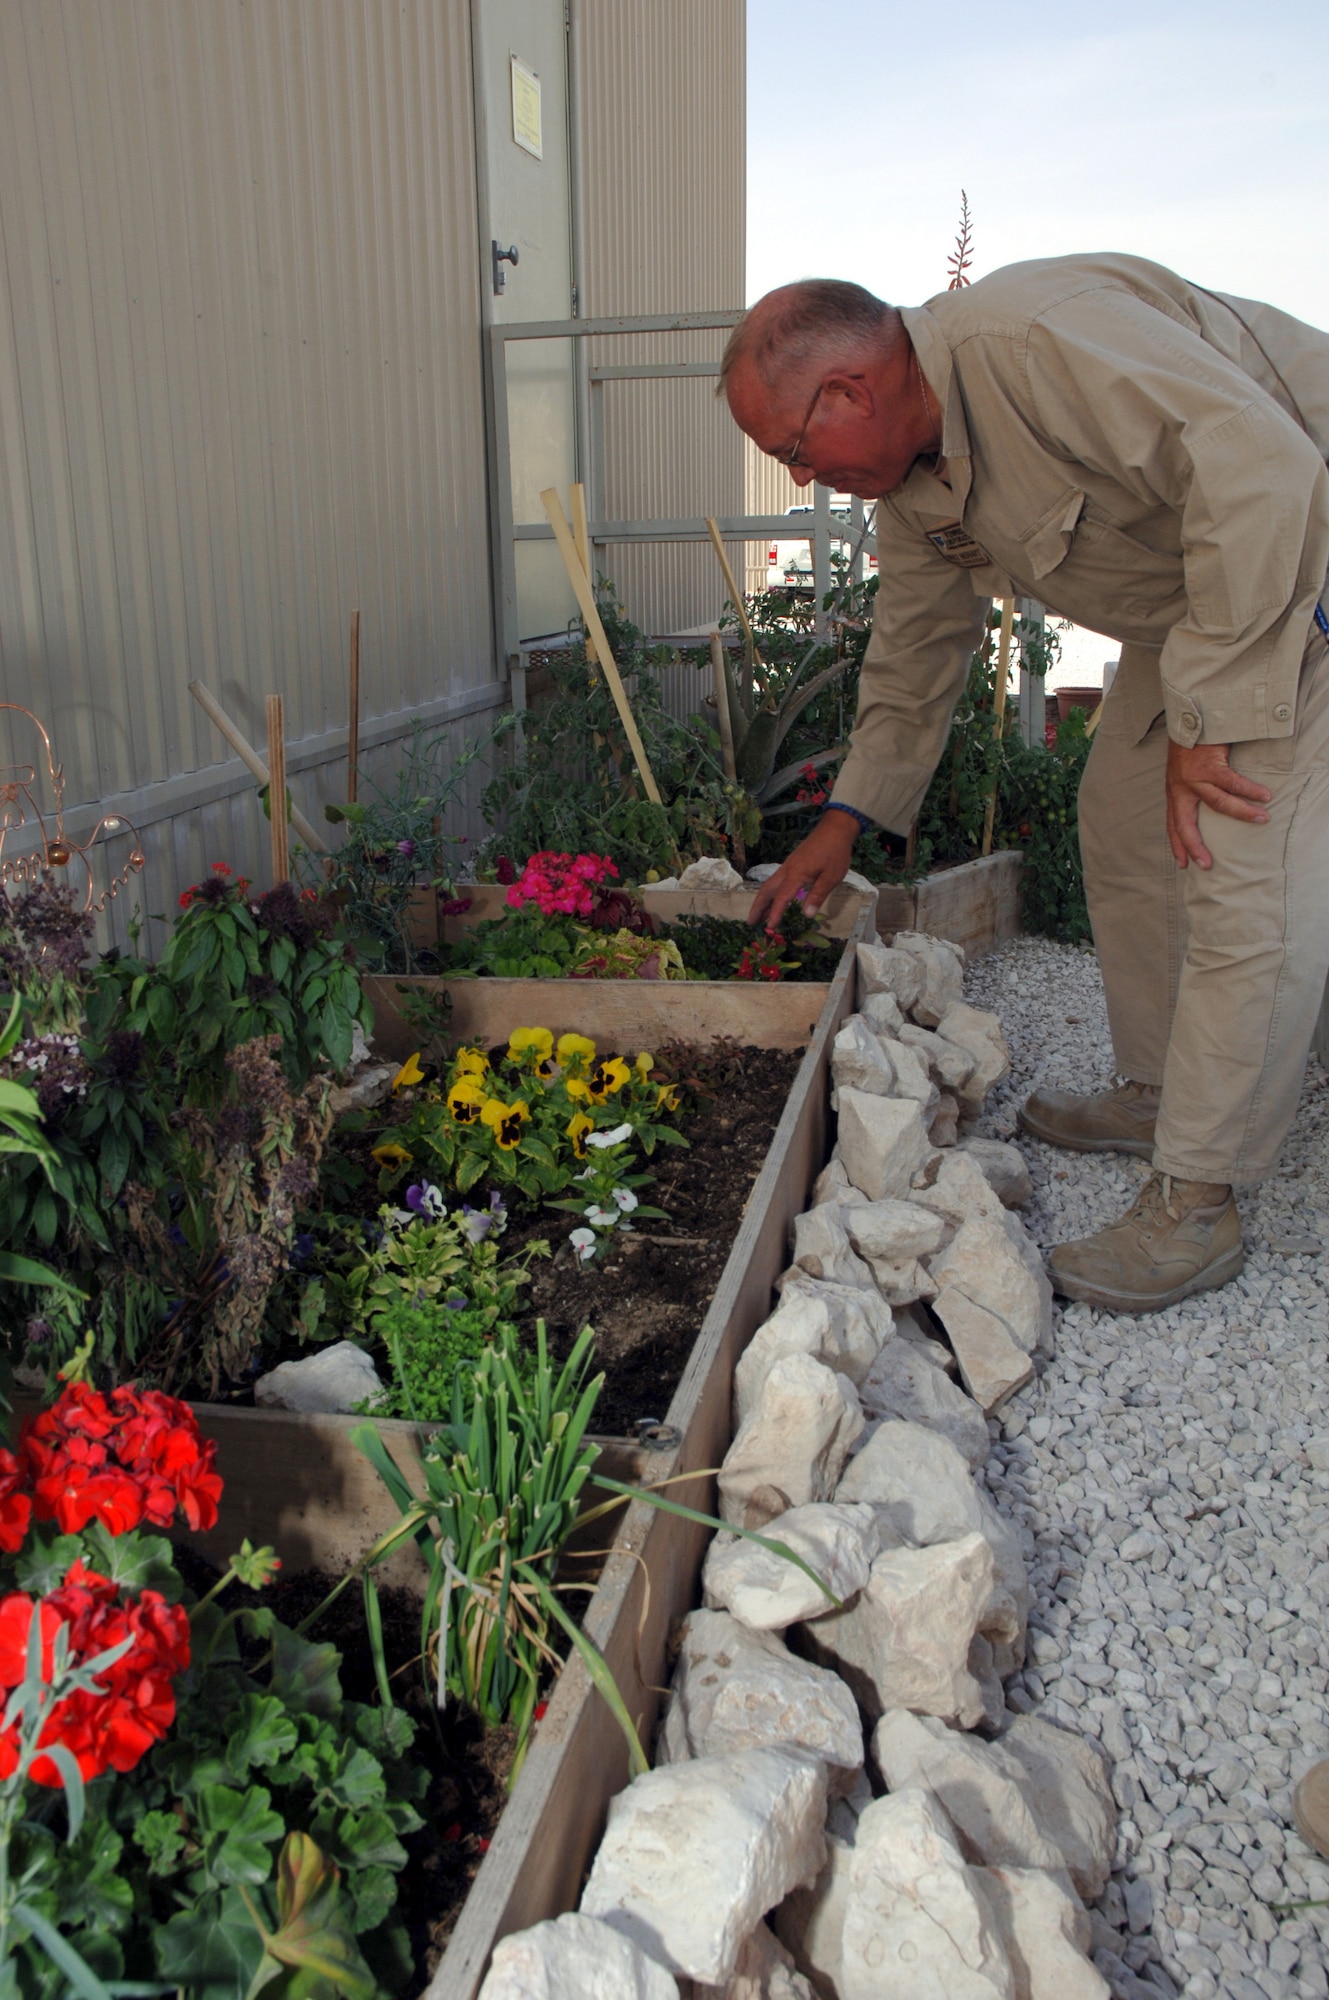 Bruce Neihart, a contractor at a deployed location in Southwest Asia checks the growth of his side project -- a mini garden with flowers, herbs, and tomatoes Wednesday, Mar. 8, 2006. He is well known for his tomatoes and other veggies sprouting up here in the desert.  Mr. Neihart is with the 379th Expeditionary Logistics Readiness Squadron.  (U.S. Air Force photo/Staff Sgt. Joshua Strang) 